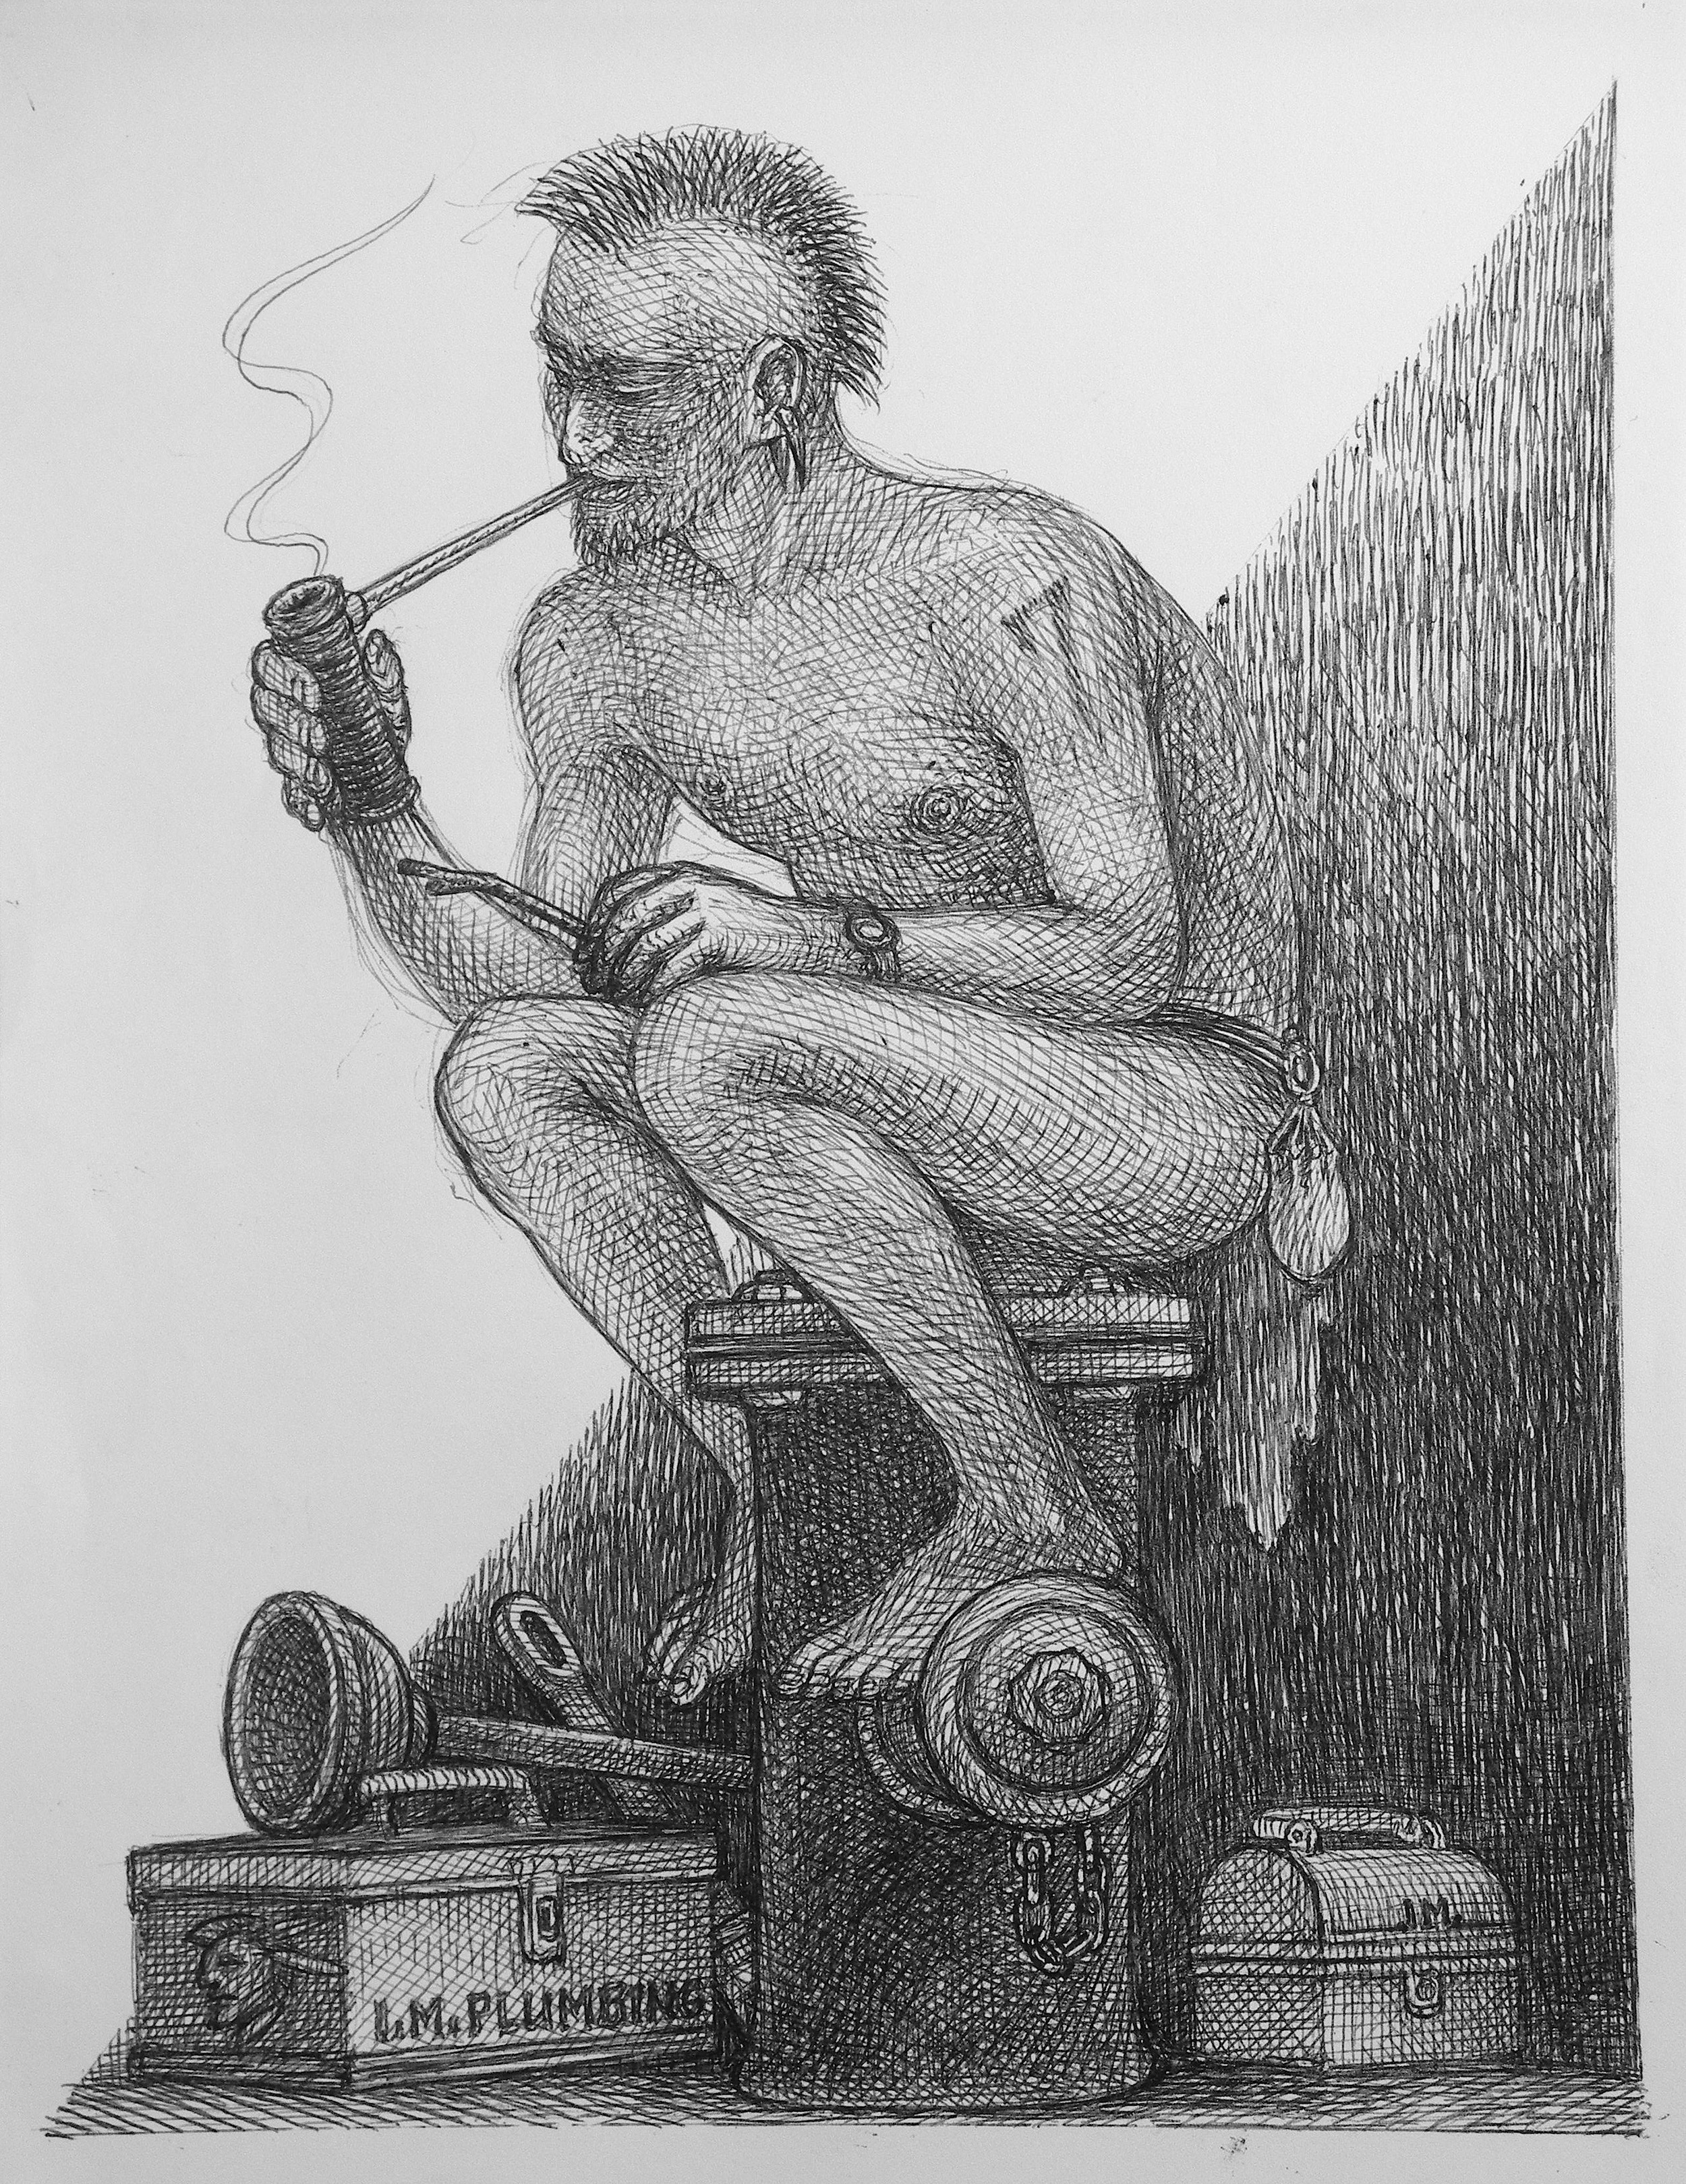 "Mohawk Plumber" by Vernon Courtlandt Johnson. © 2004 VCJ. All rights reserved.